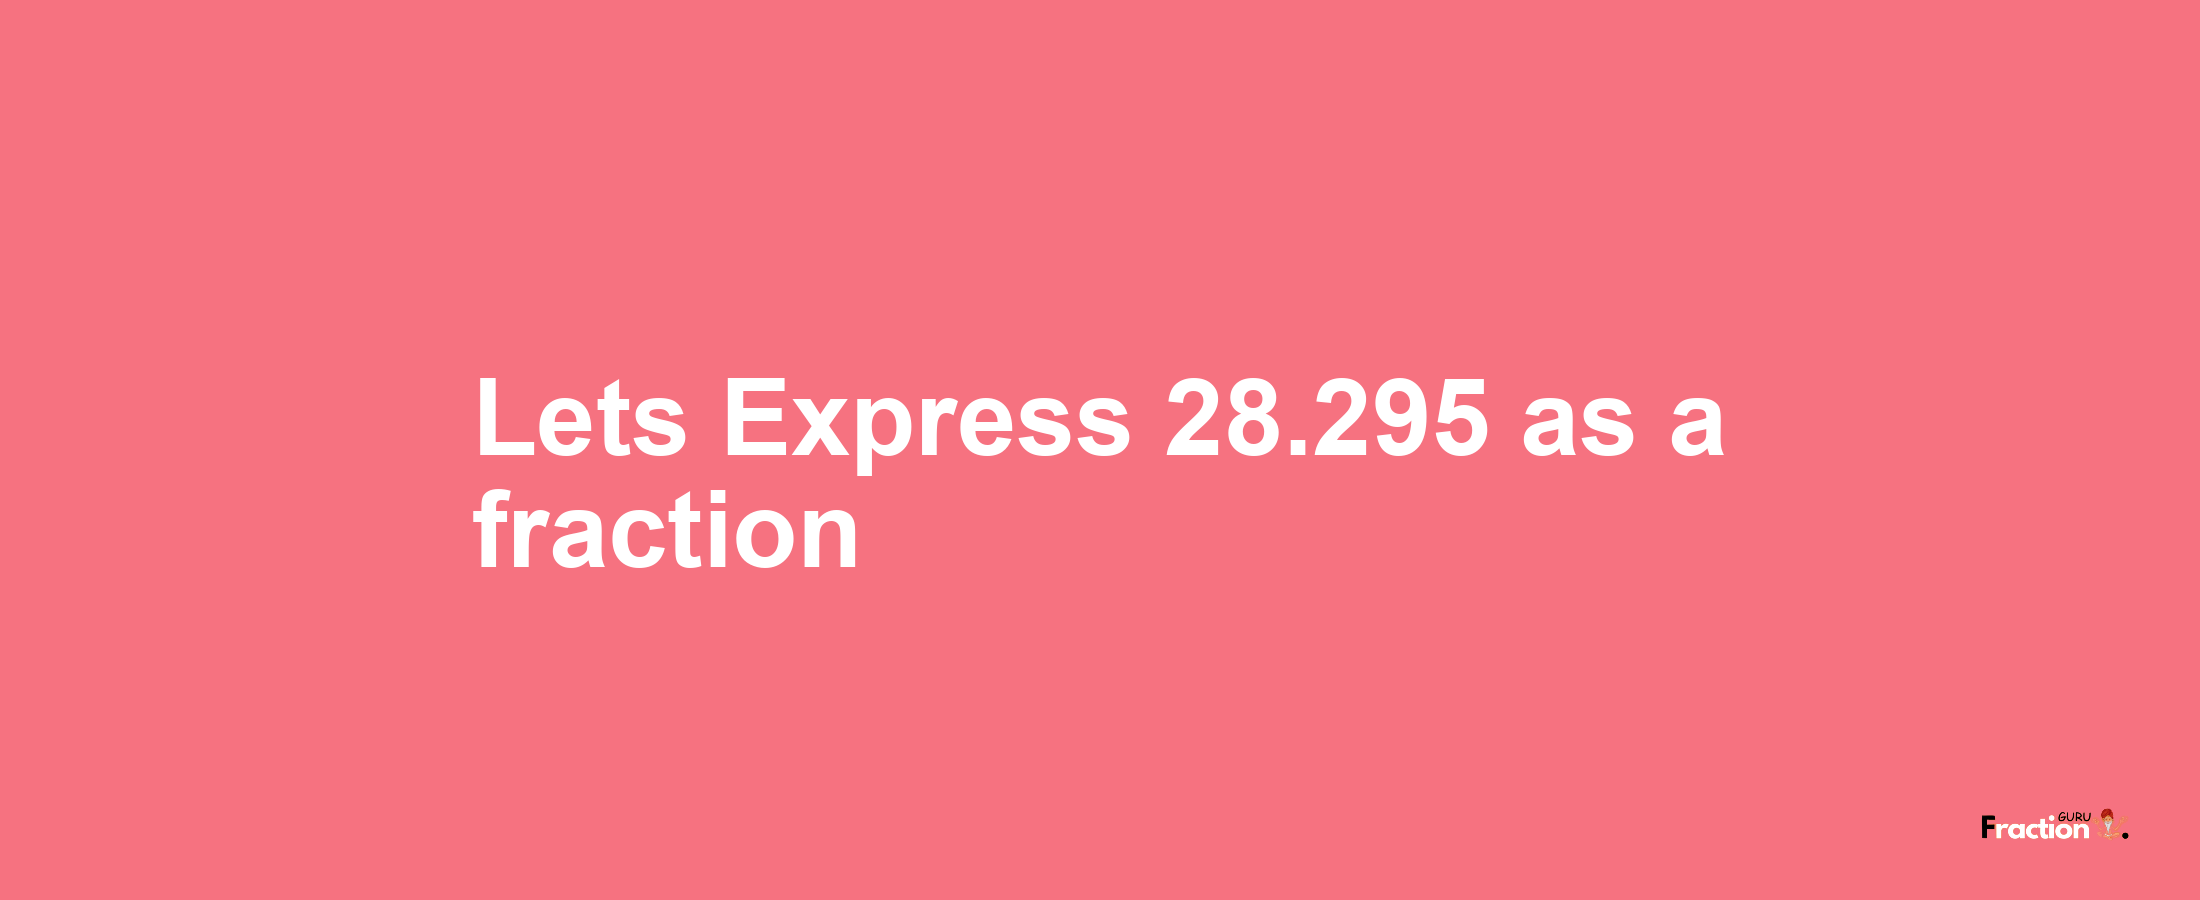 Lets Express 28.295 as afraction